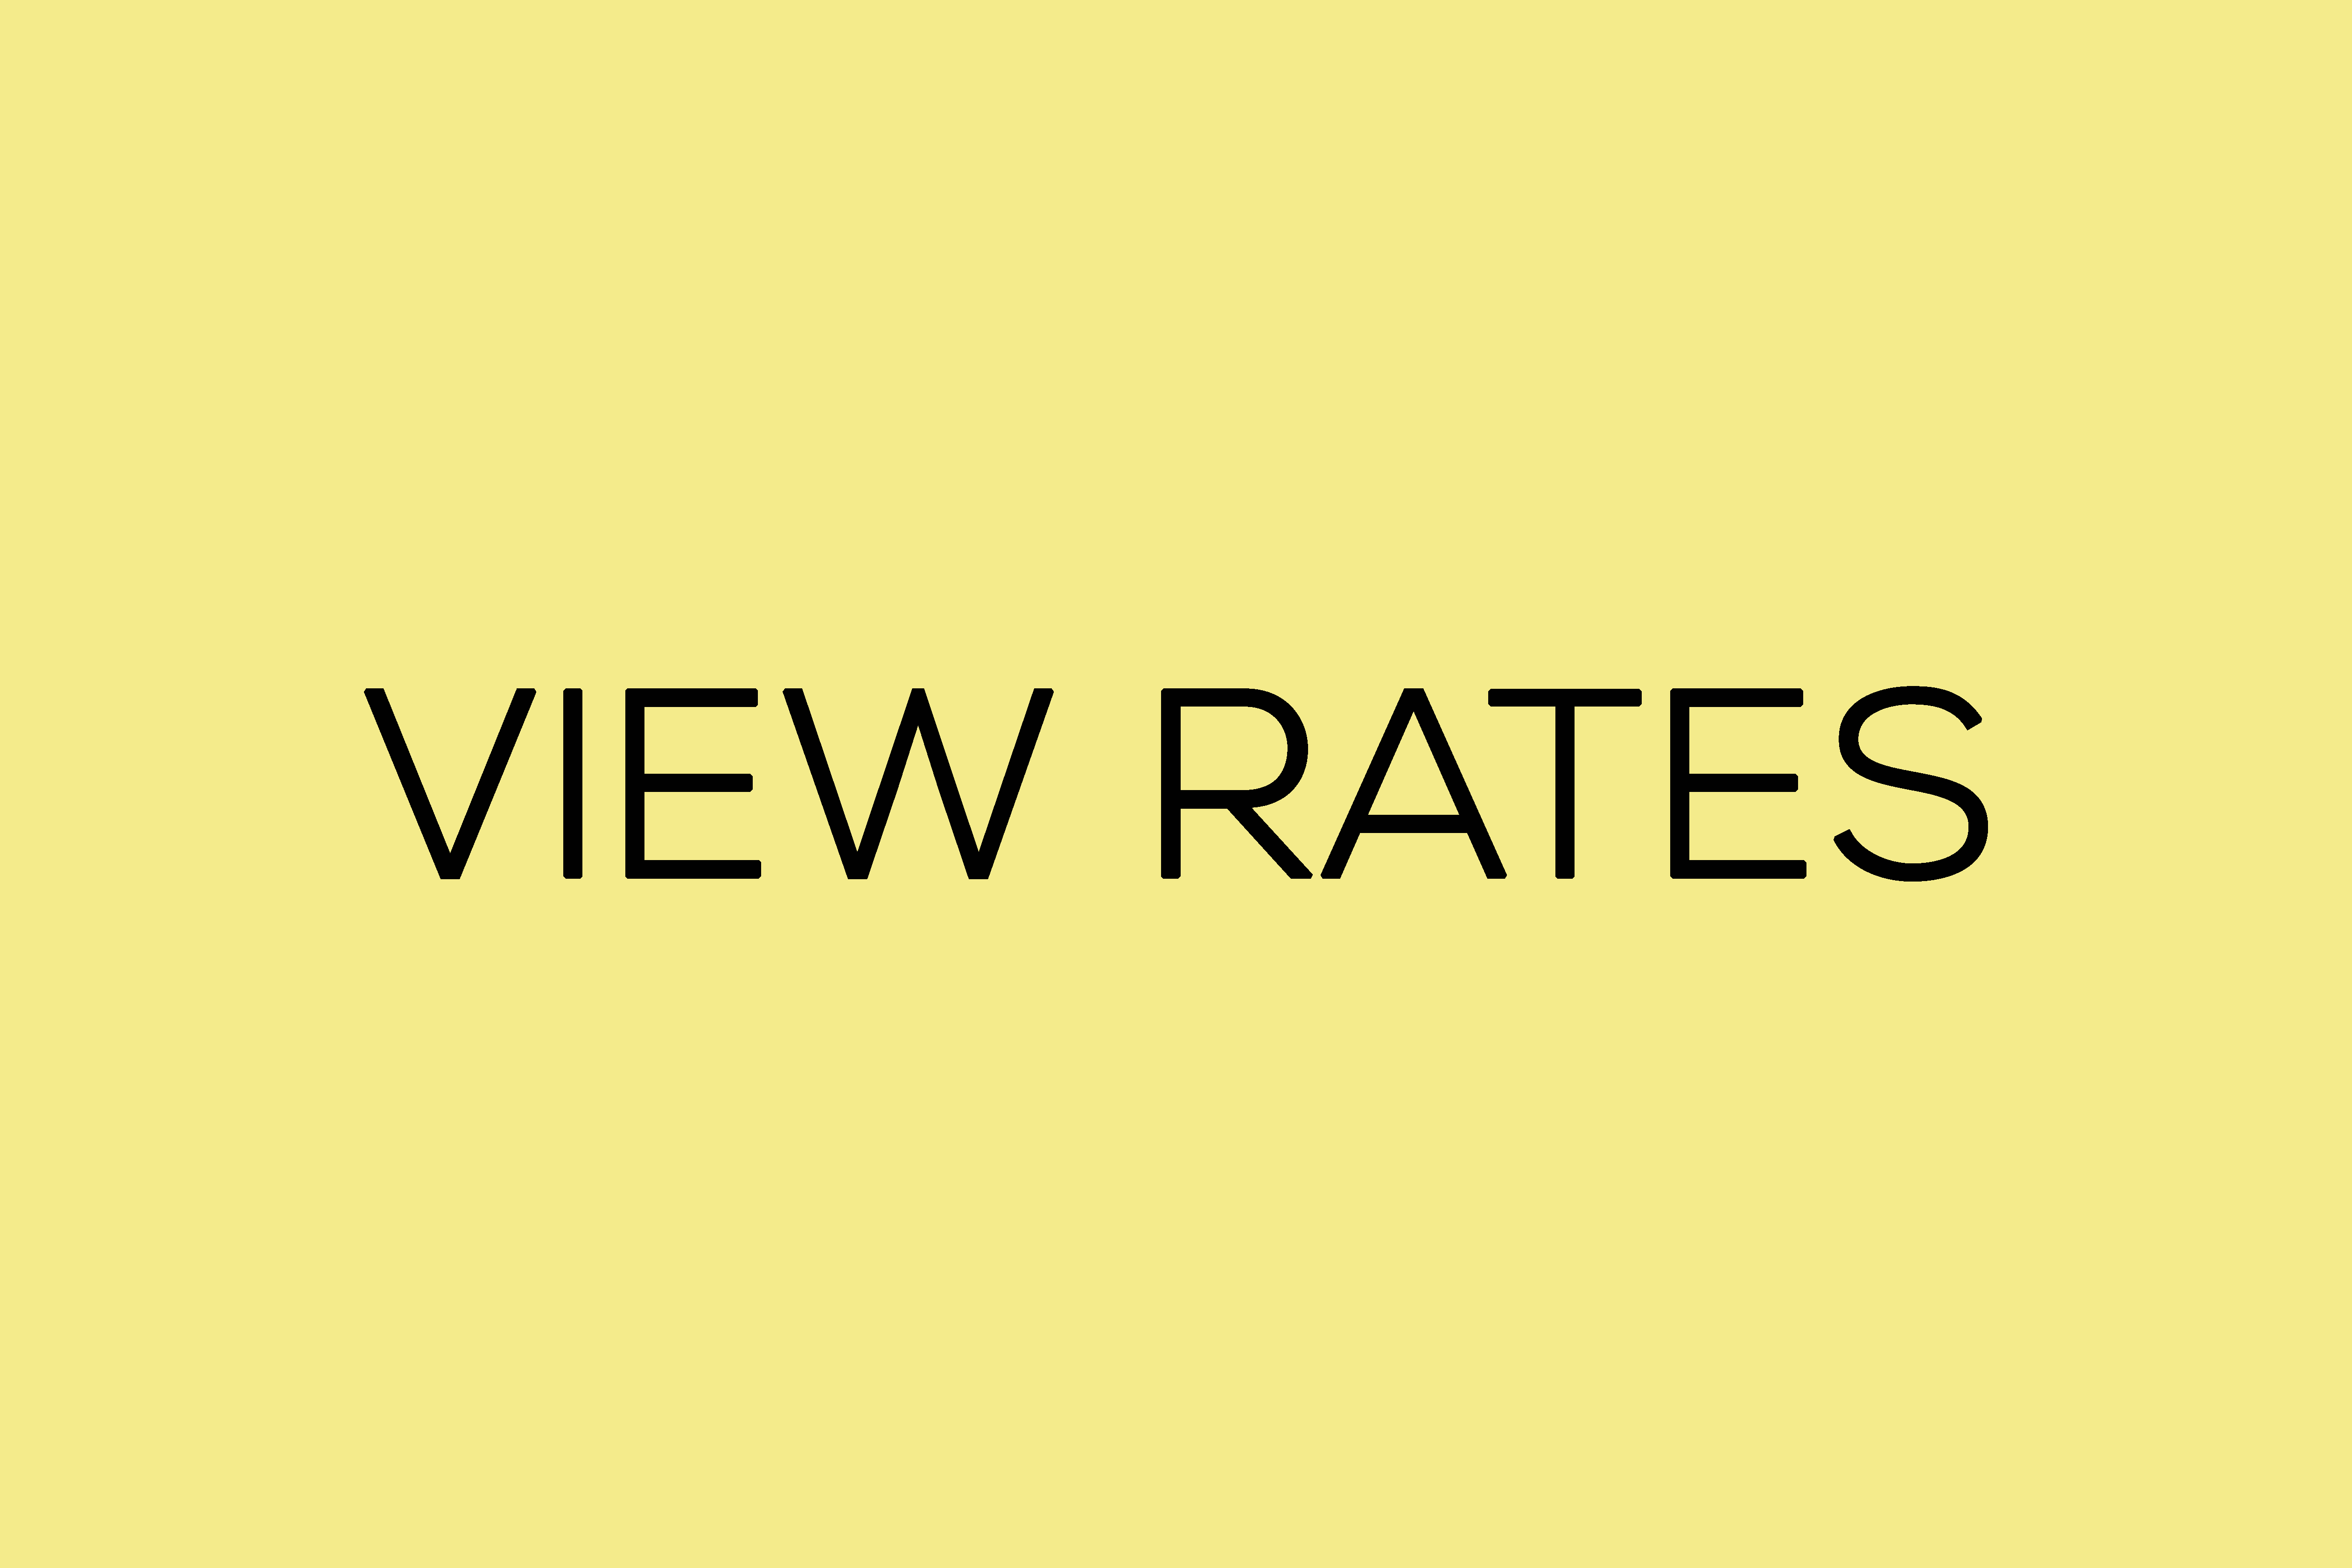 VIEW RATES YELLOW